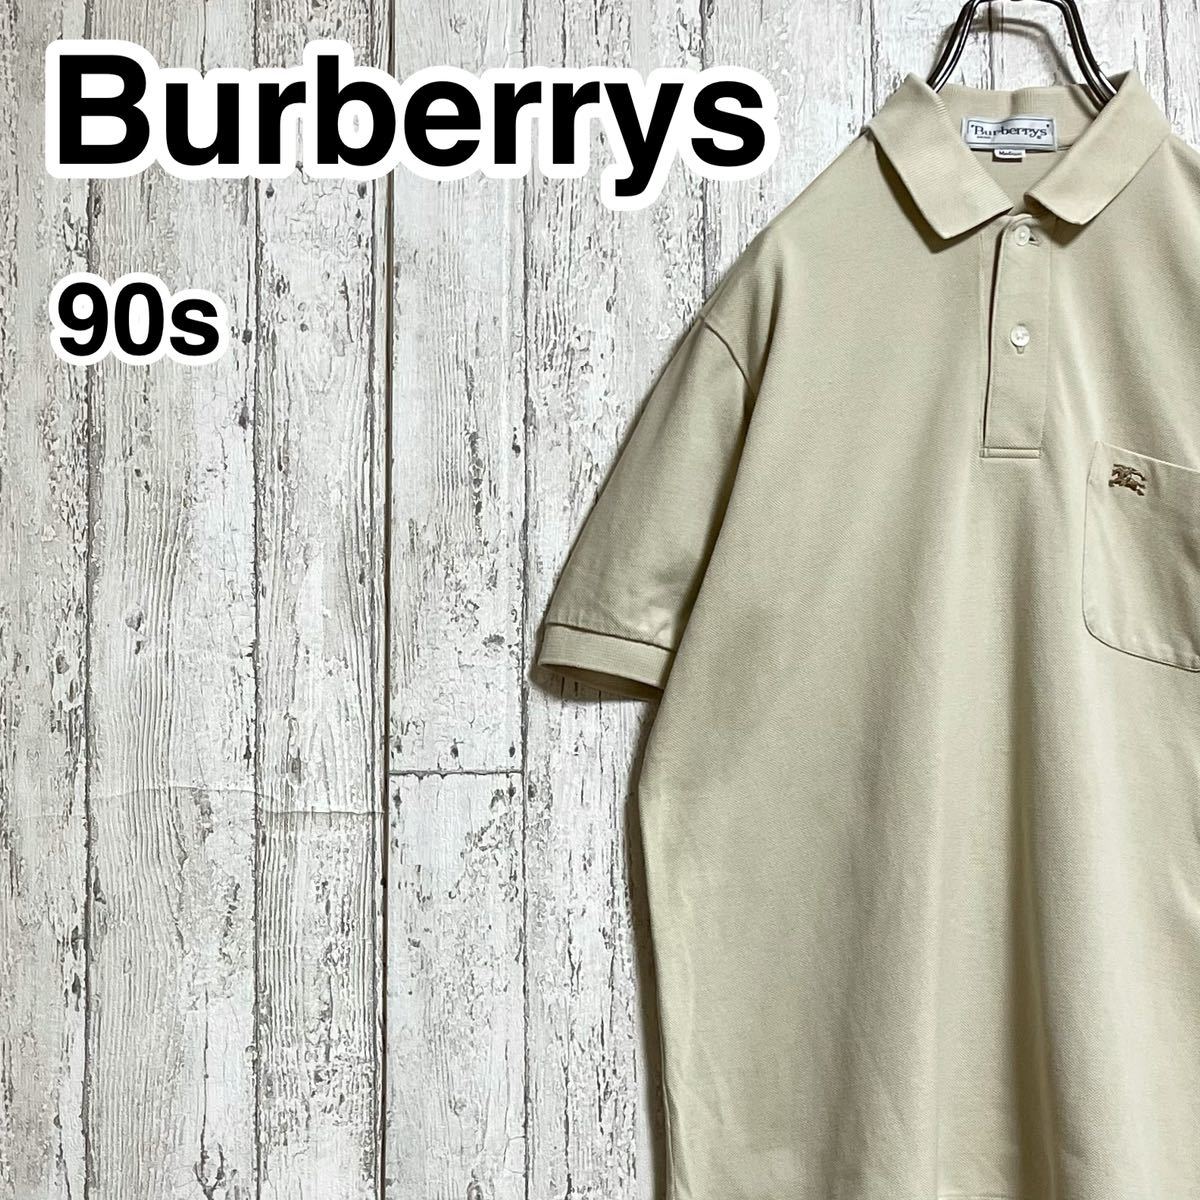 [a- scalar ] Burberry zBurberrys polo-shirt with short sleeves C-TK83 M size beige 90s hose Logo 22-102